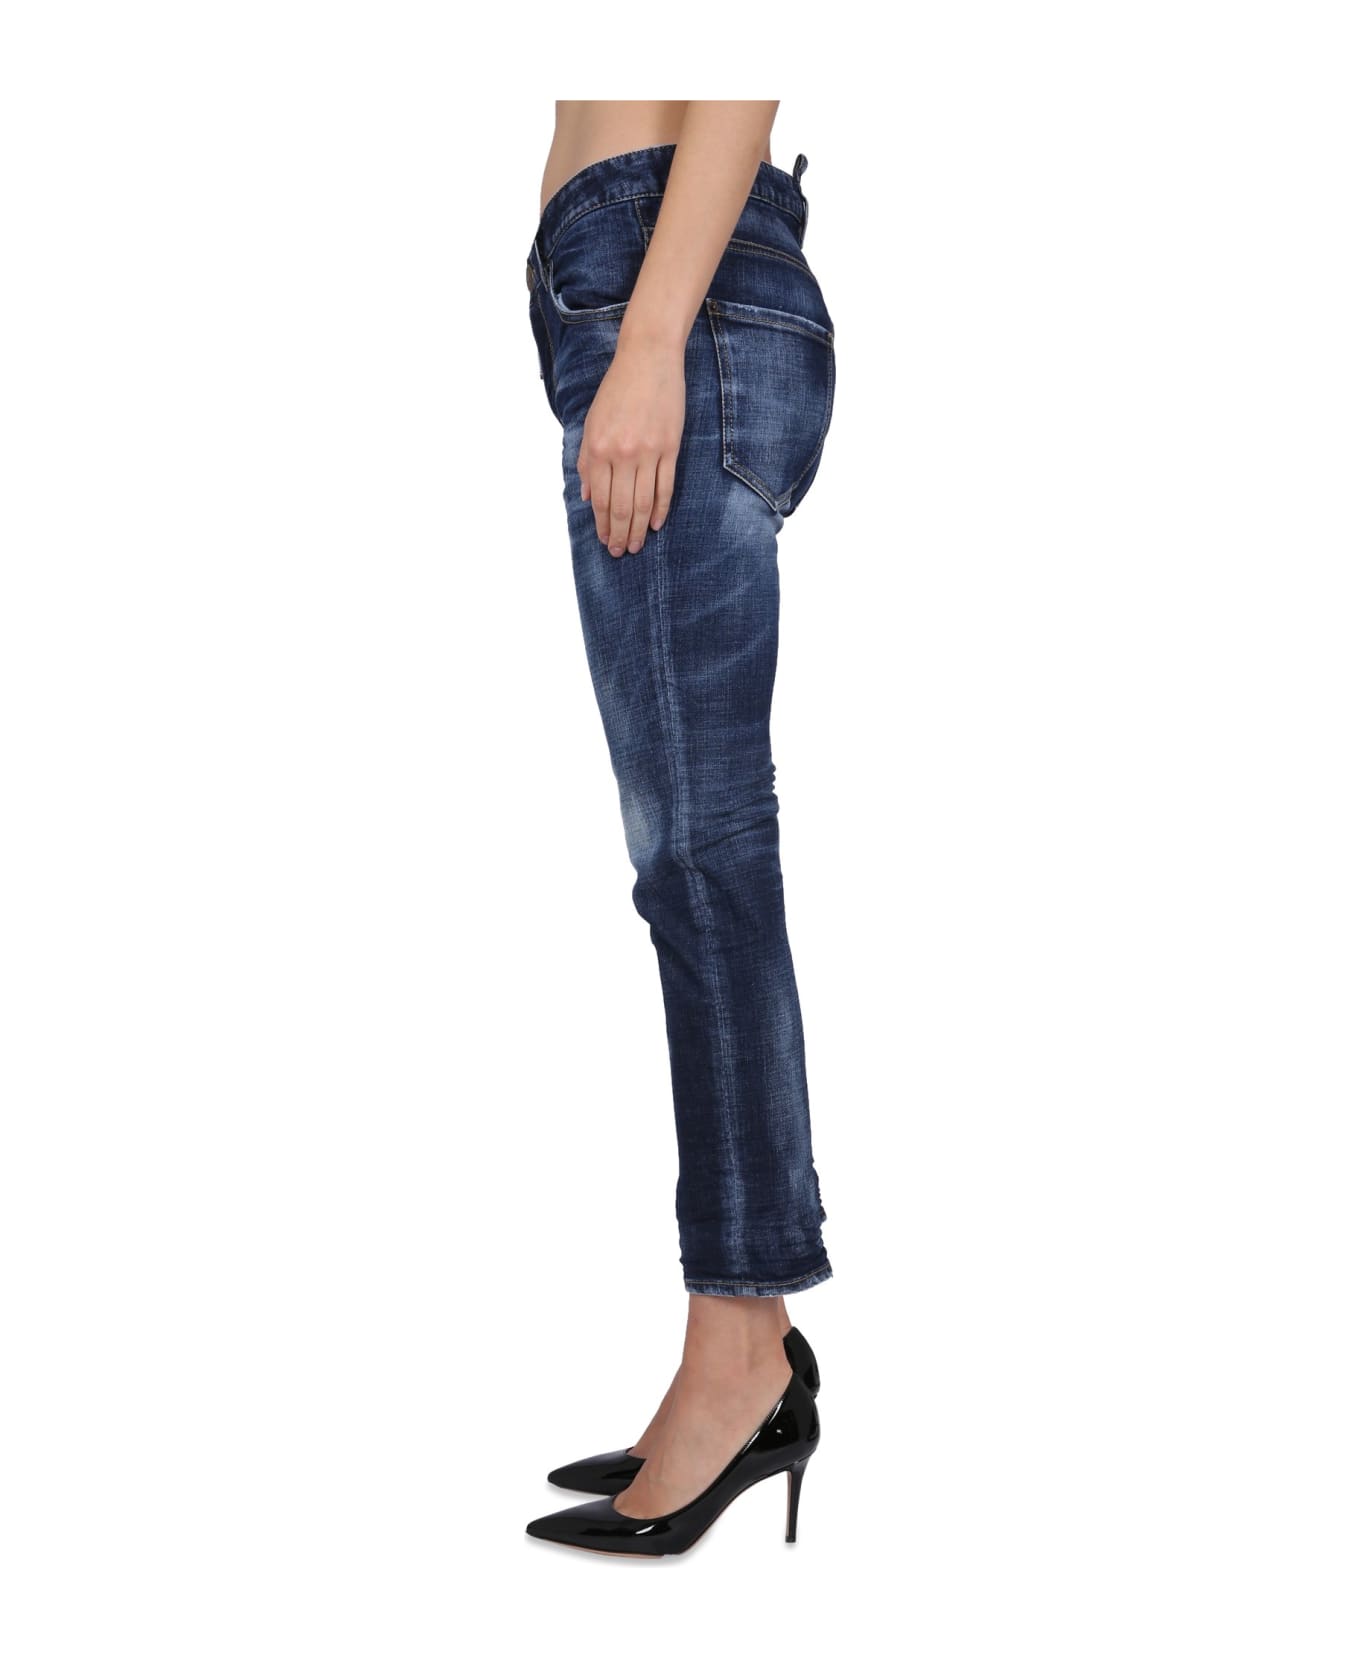 Dsquared2 Cool Girl Jeans - NAVY BLUE